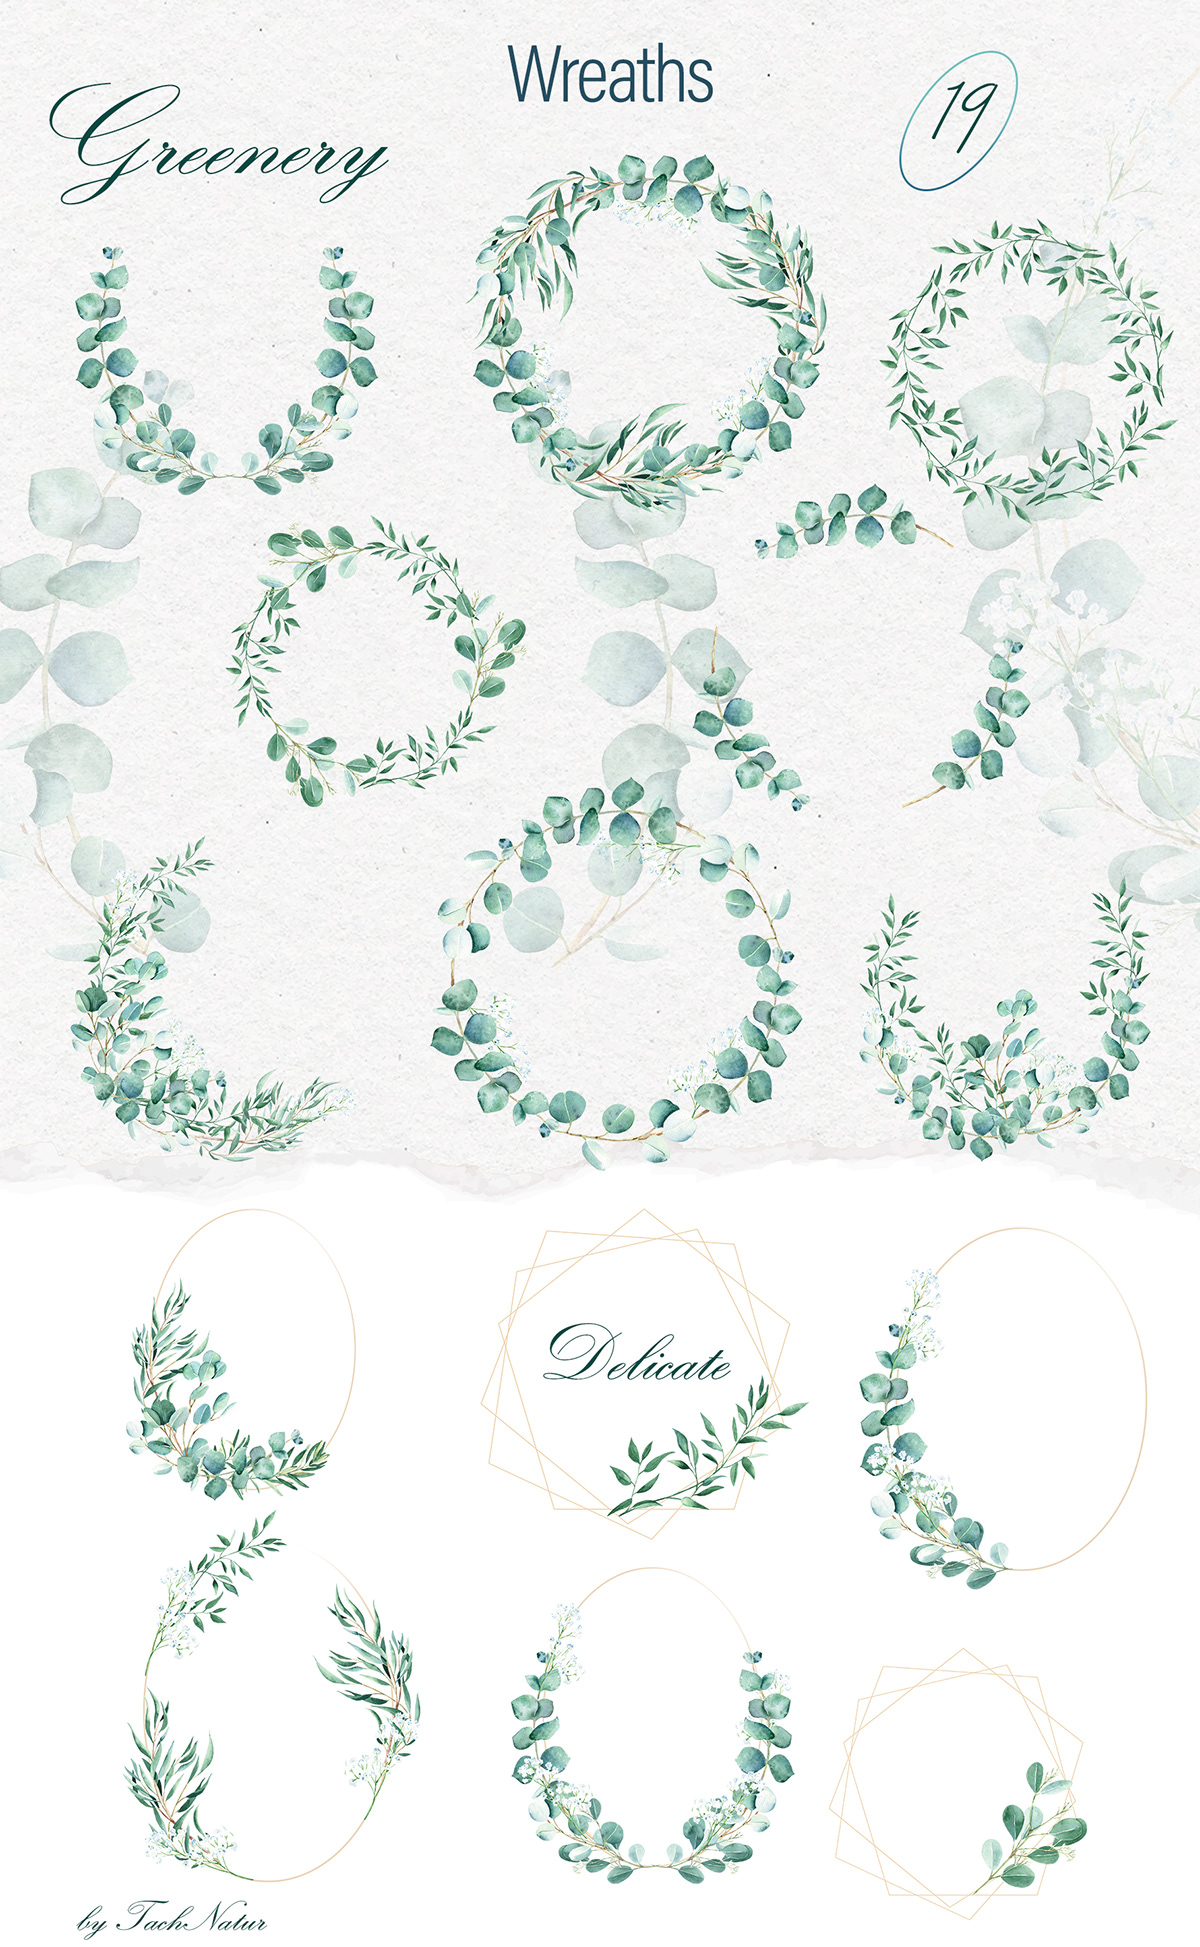 watercolor illustration hand drawn greenery glass Vase clipart floral botanical Nature eucalyptus